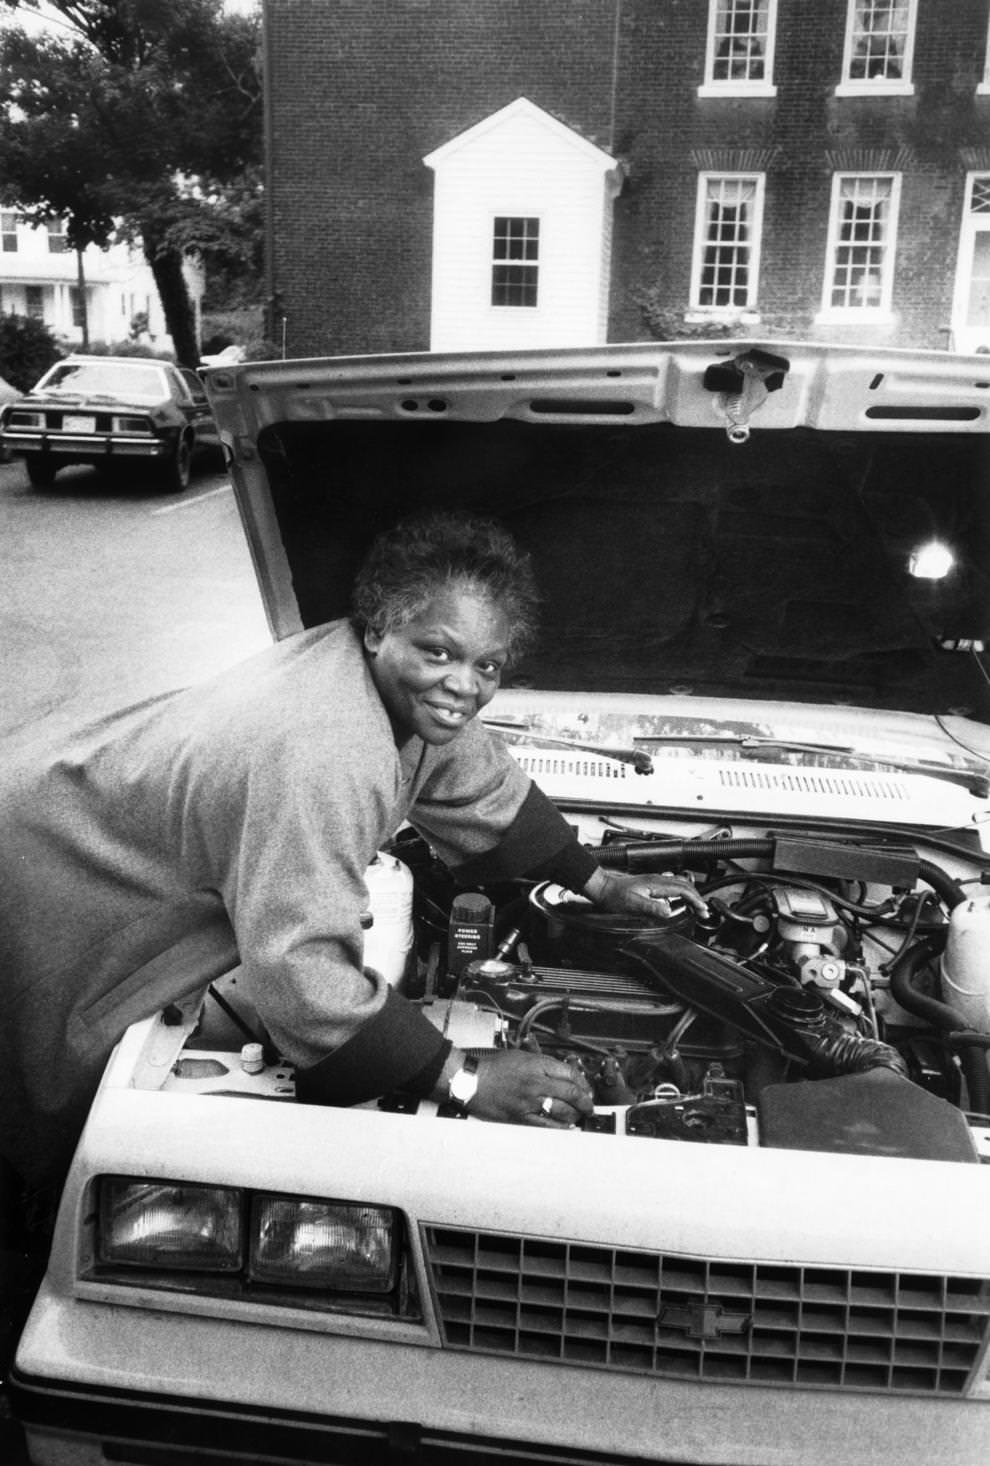 Hilda West worked on a car in Fredericksburg, where she had addressed an apprenticeship conference, 1986